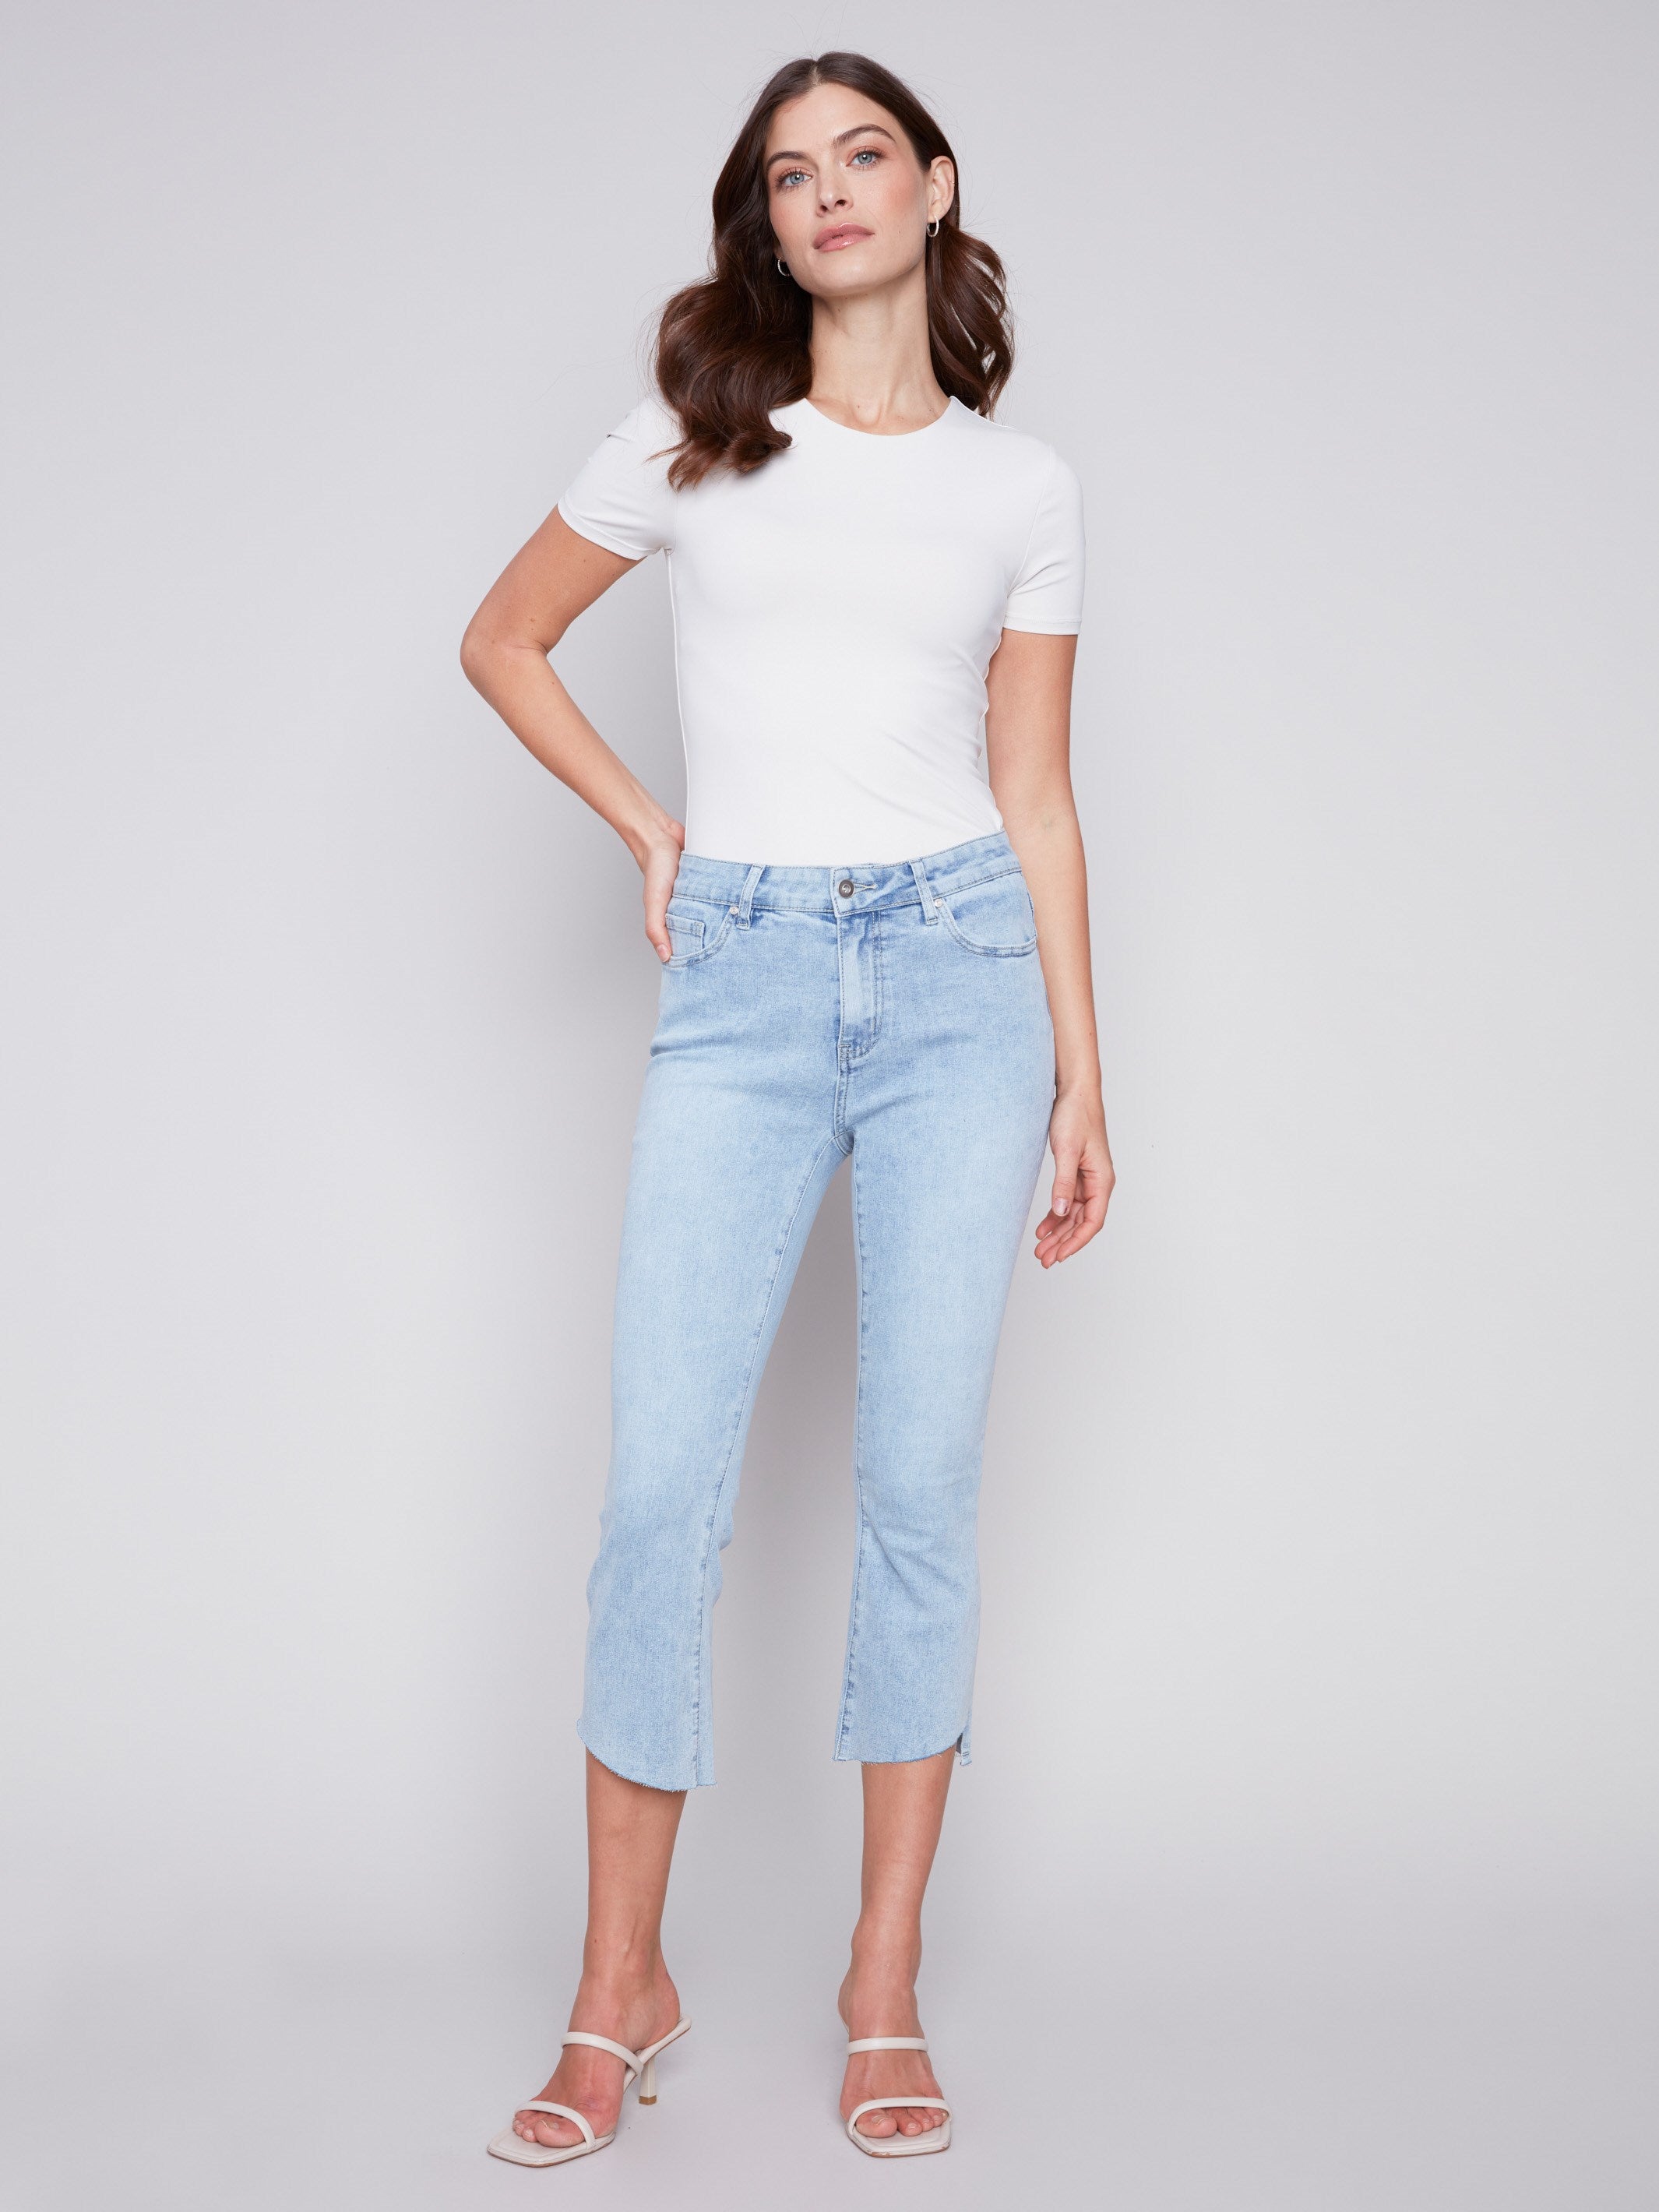 Charlie B Cropped Bootcut Jeans with Asymmetrical Hem - Bleach Blue - Image 1